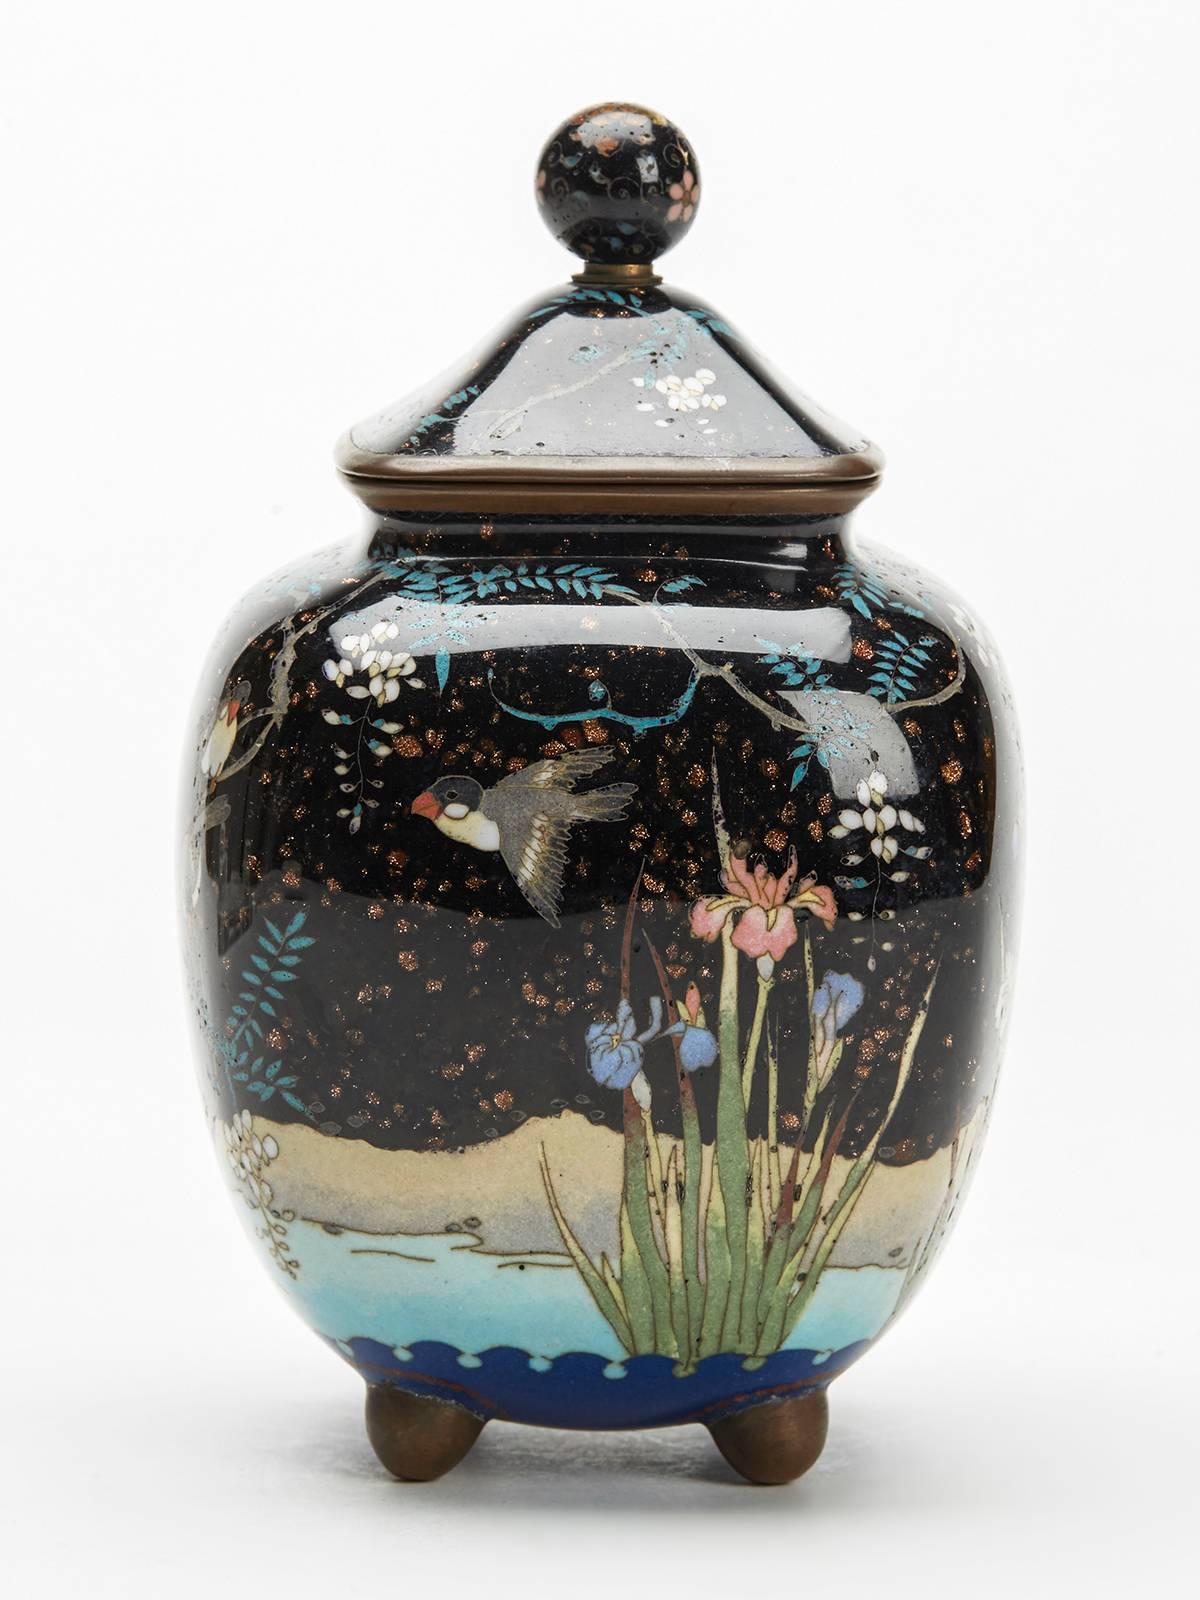 An antique Japanese lidded jar possibly a koro or tea caddy decorated with birds and wisteria alongside a pond dating from the Meiji period and 19th century. The body of the jar is decorated with birds set amidst flowering wisteria alongside a pond